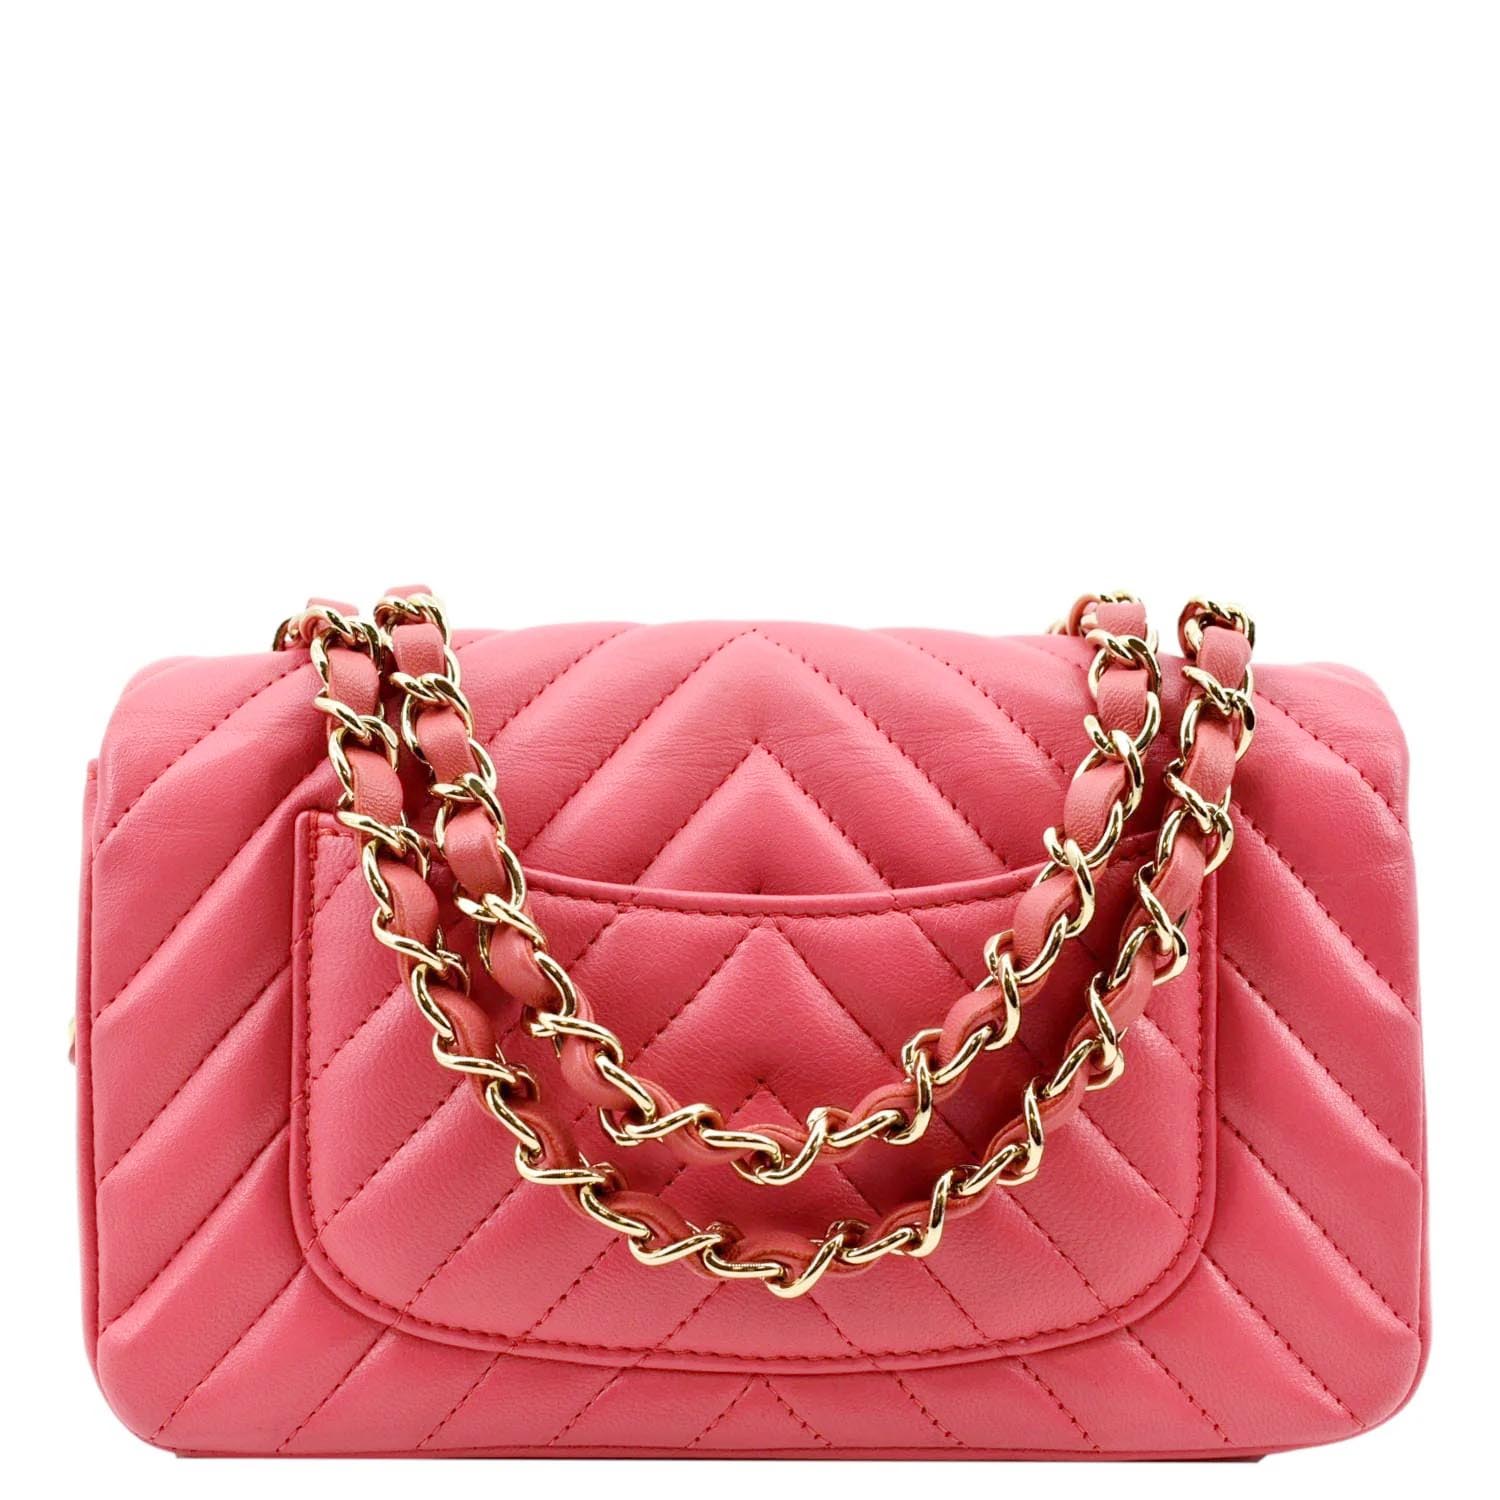 Chanel Timeless Classic Square Flap Chevron Calfskin Leather Crossbody Bag Pink